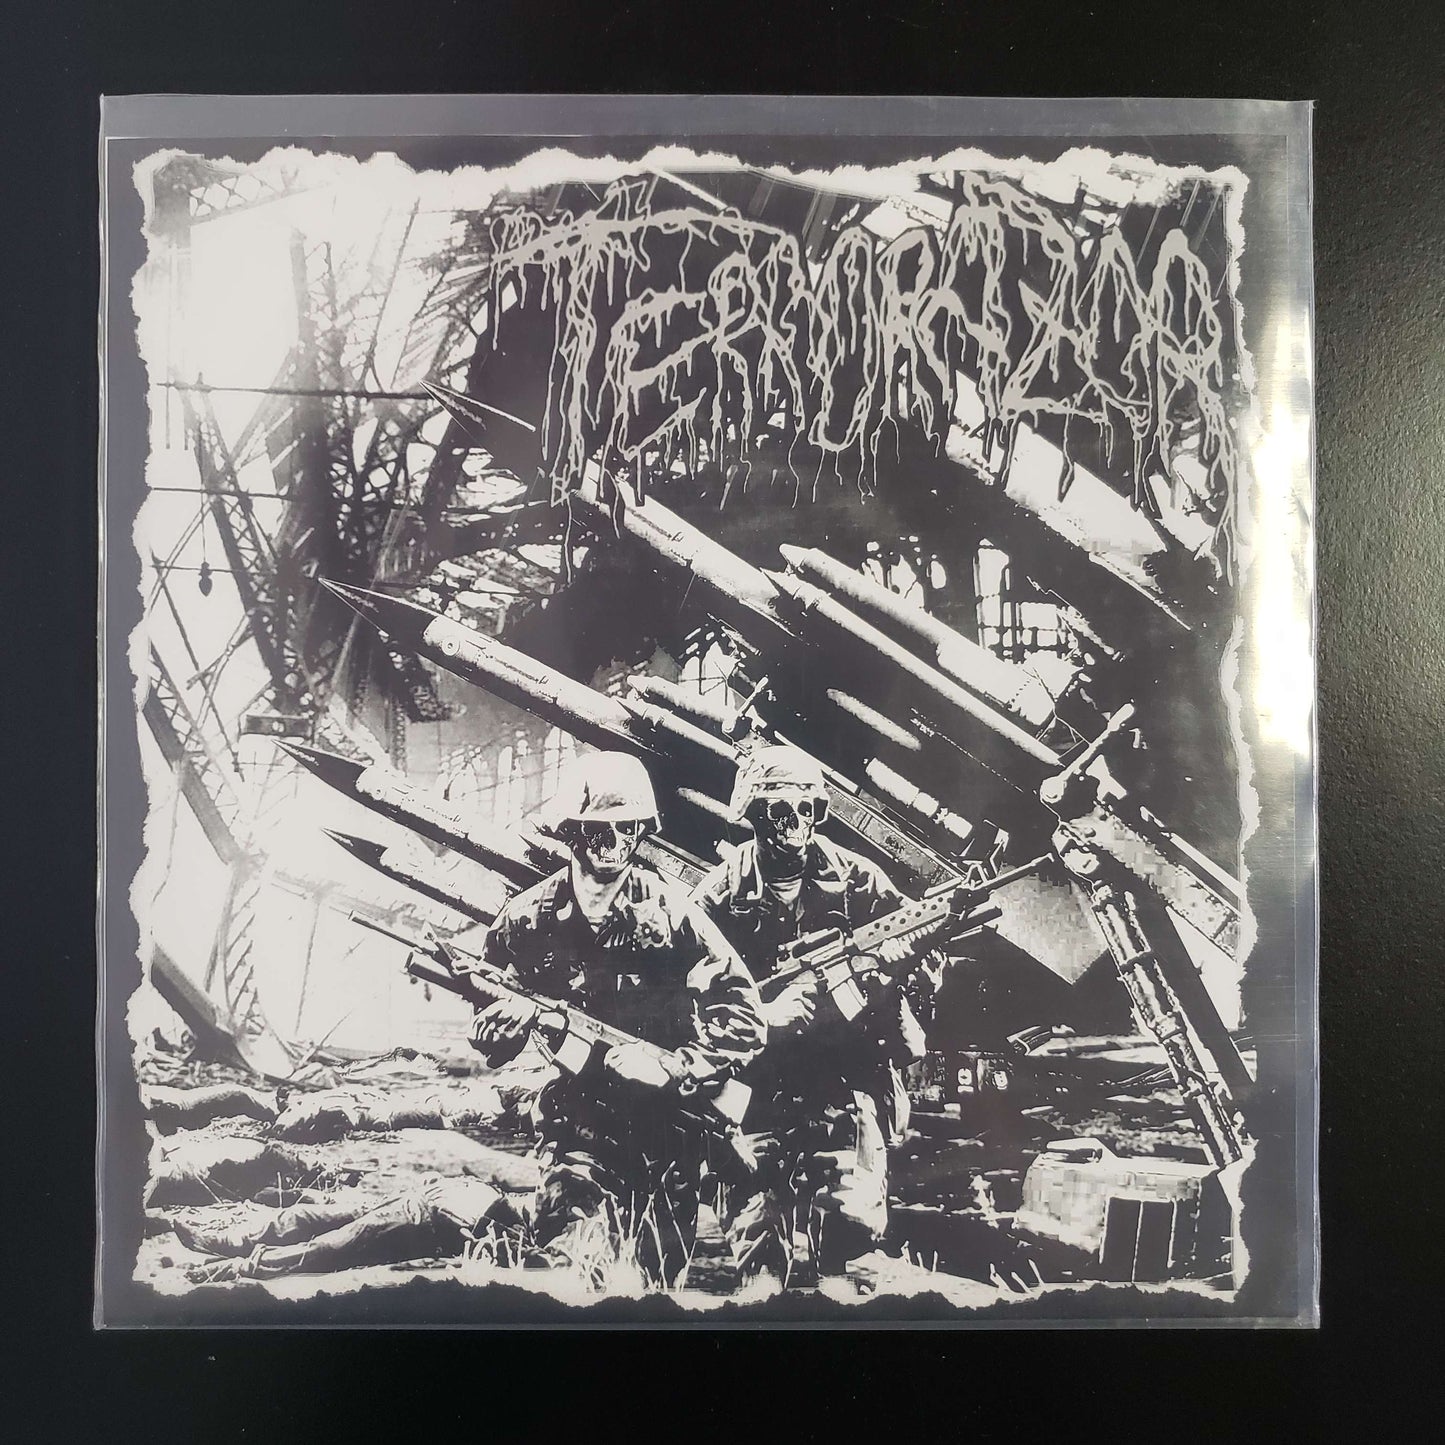 Carnivore Mind / Terrorazor - Uncontrollable Urge for Dirt and Putrefaction 7" EP (used)